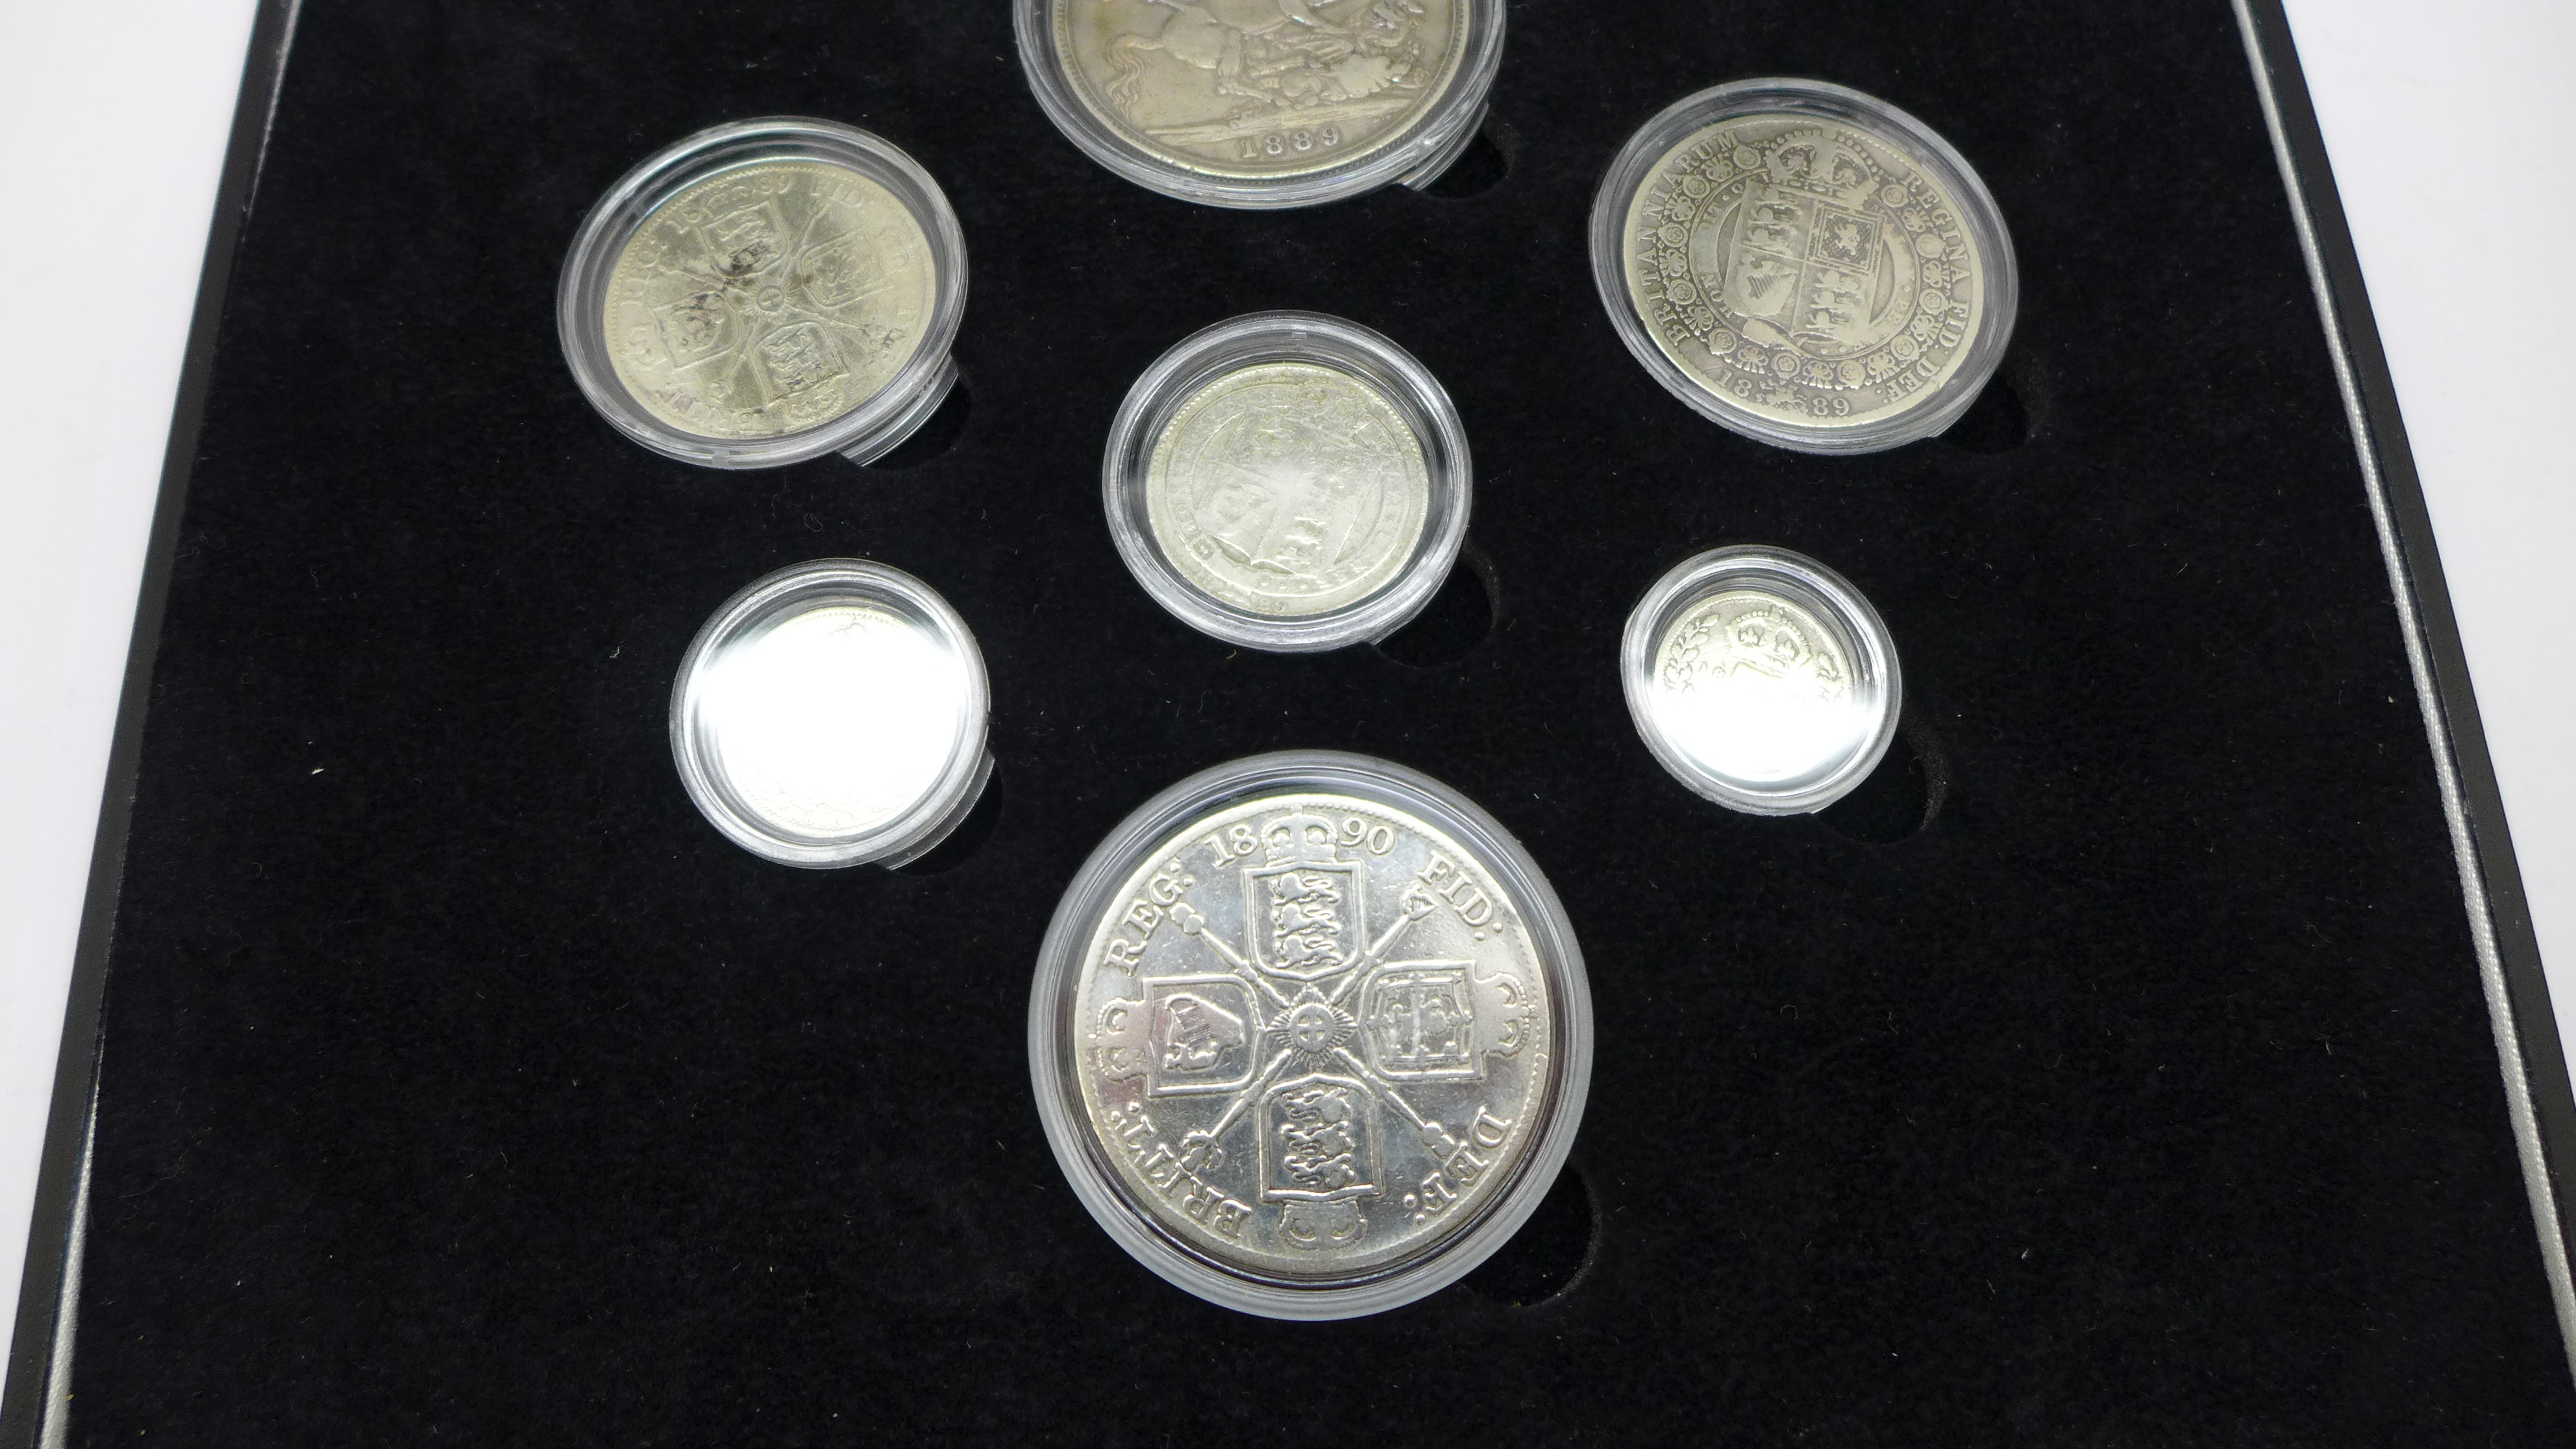 A The London Mint Office Queen Victoria Jubilee Portrait 1887-1893 Silver Coin Set, cased - Image 2 of 4